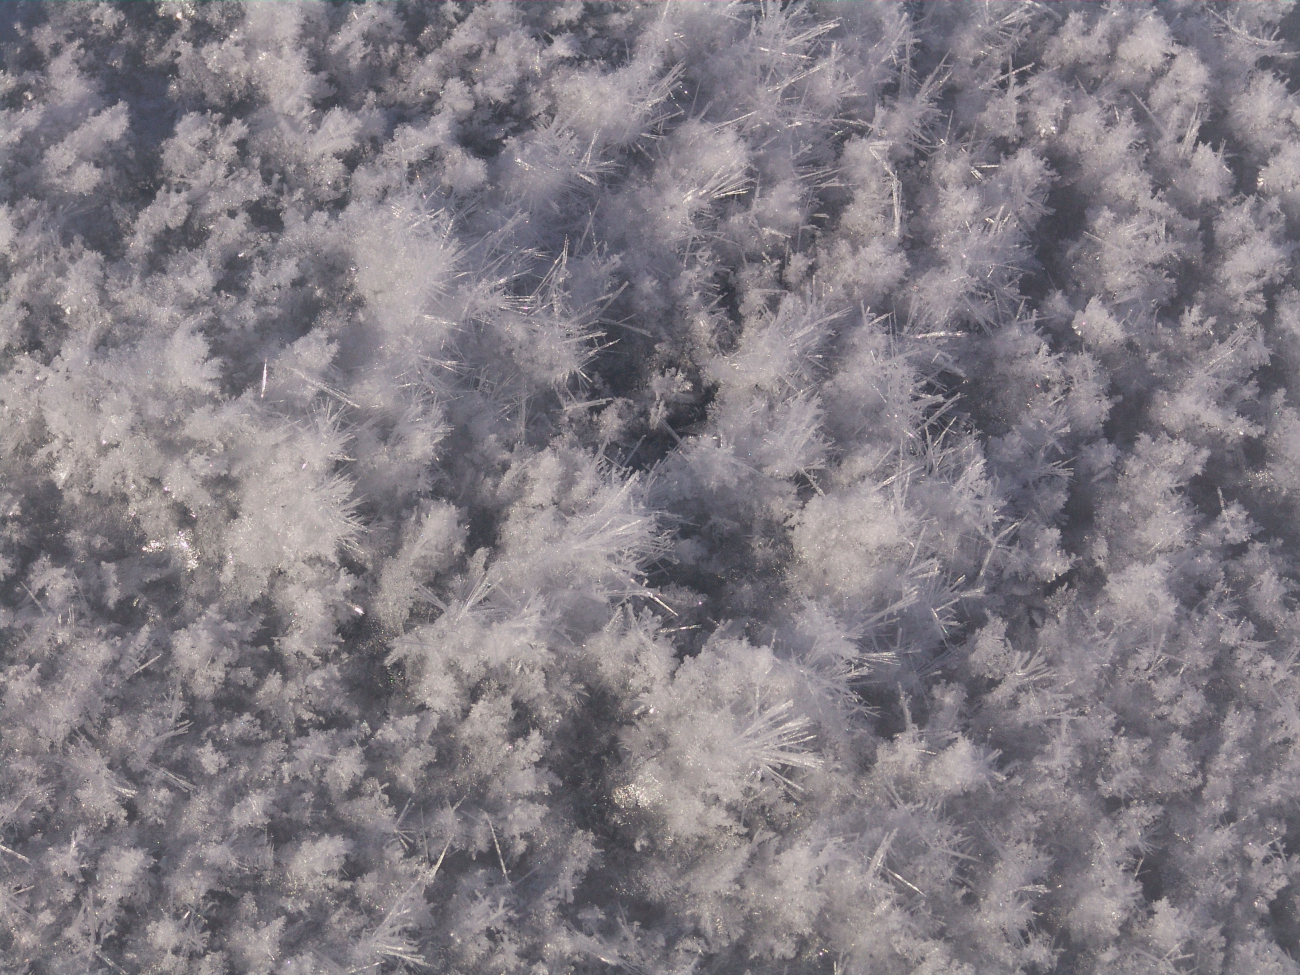 Long needle-like ice crystals on top of ice surface